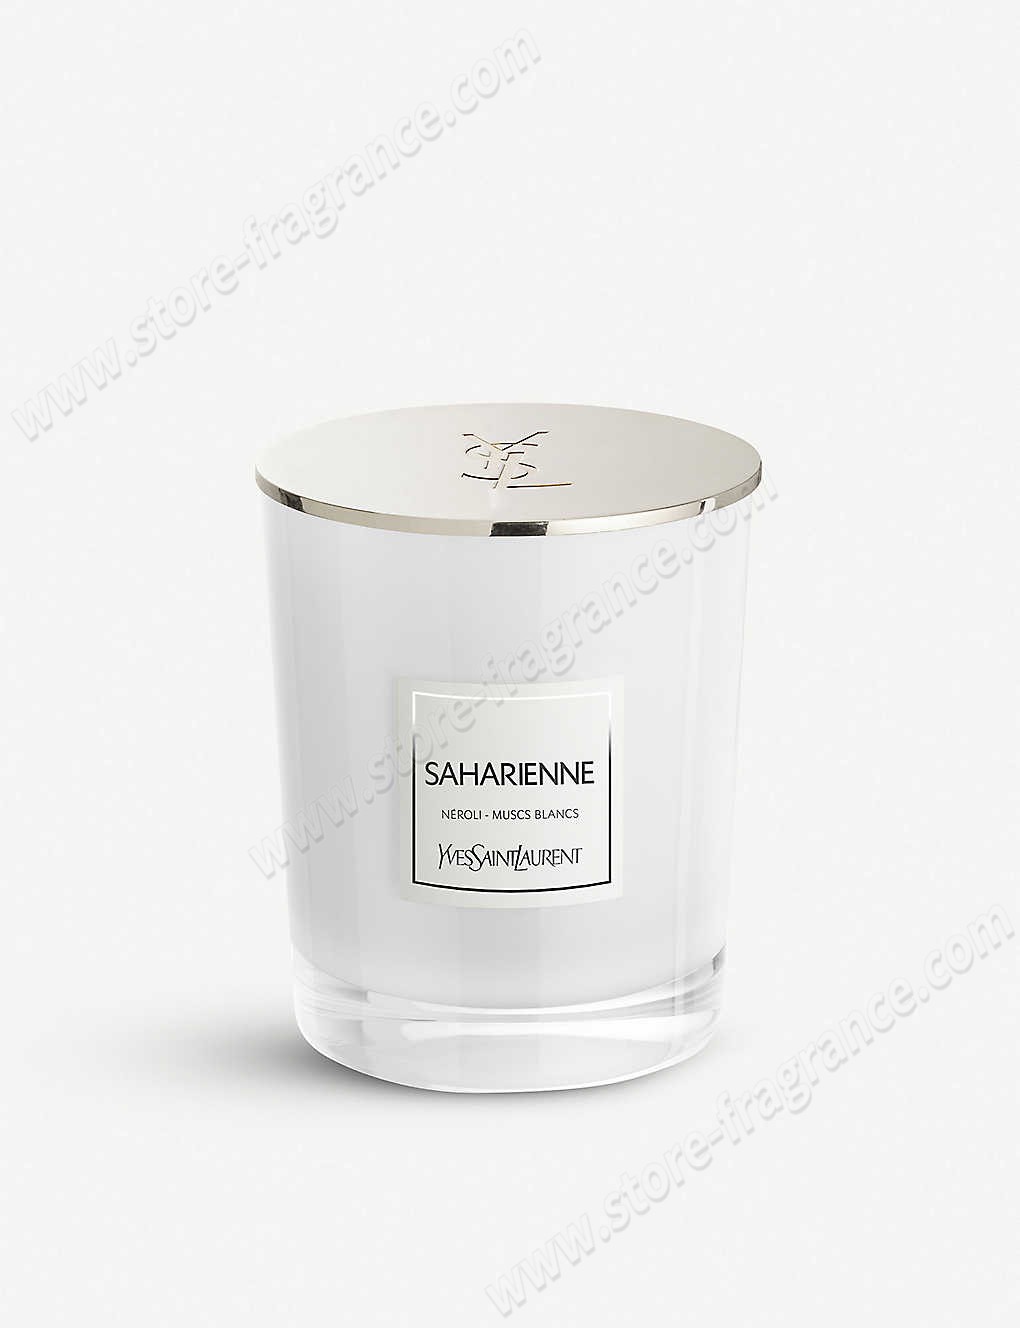 YVES SAINT LAURENT/Saharienne scented candle 180g ✿ Discount Store - YVES SAINT LAURENT/Saharienne scented candle 180g ✿ Discount Store